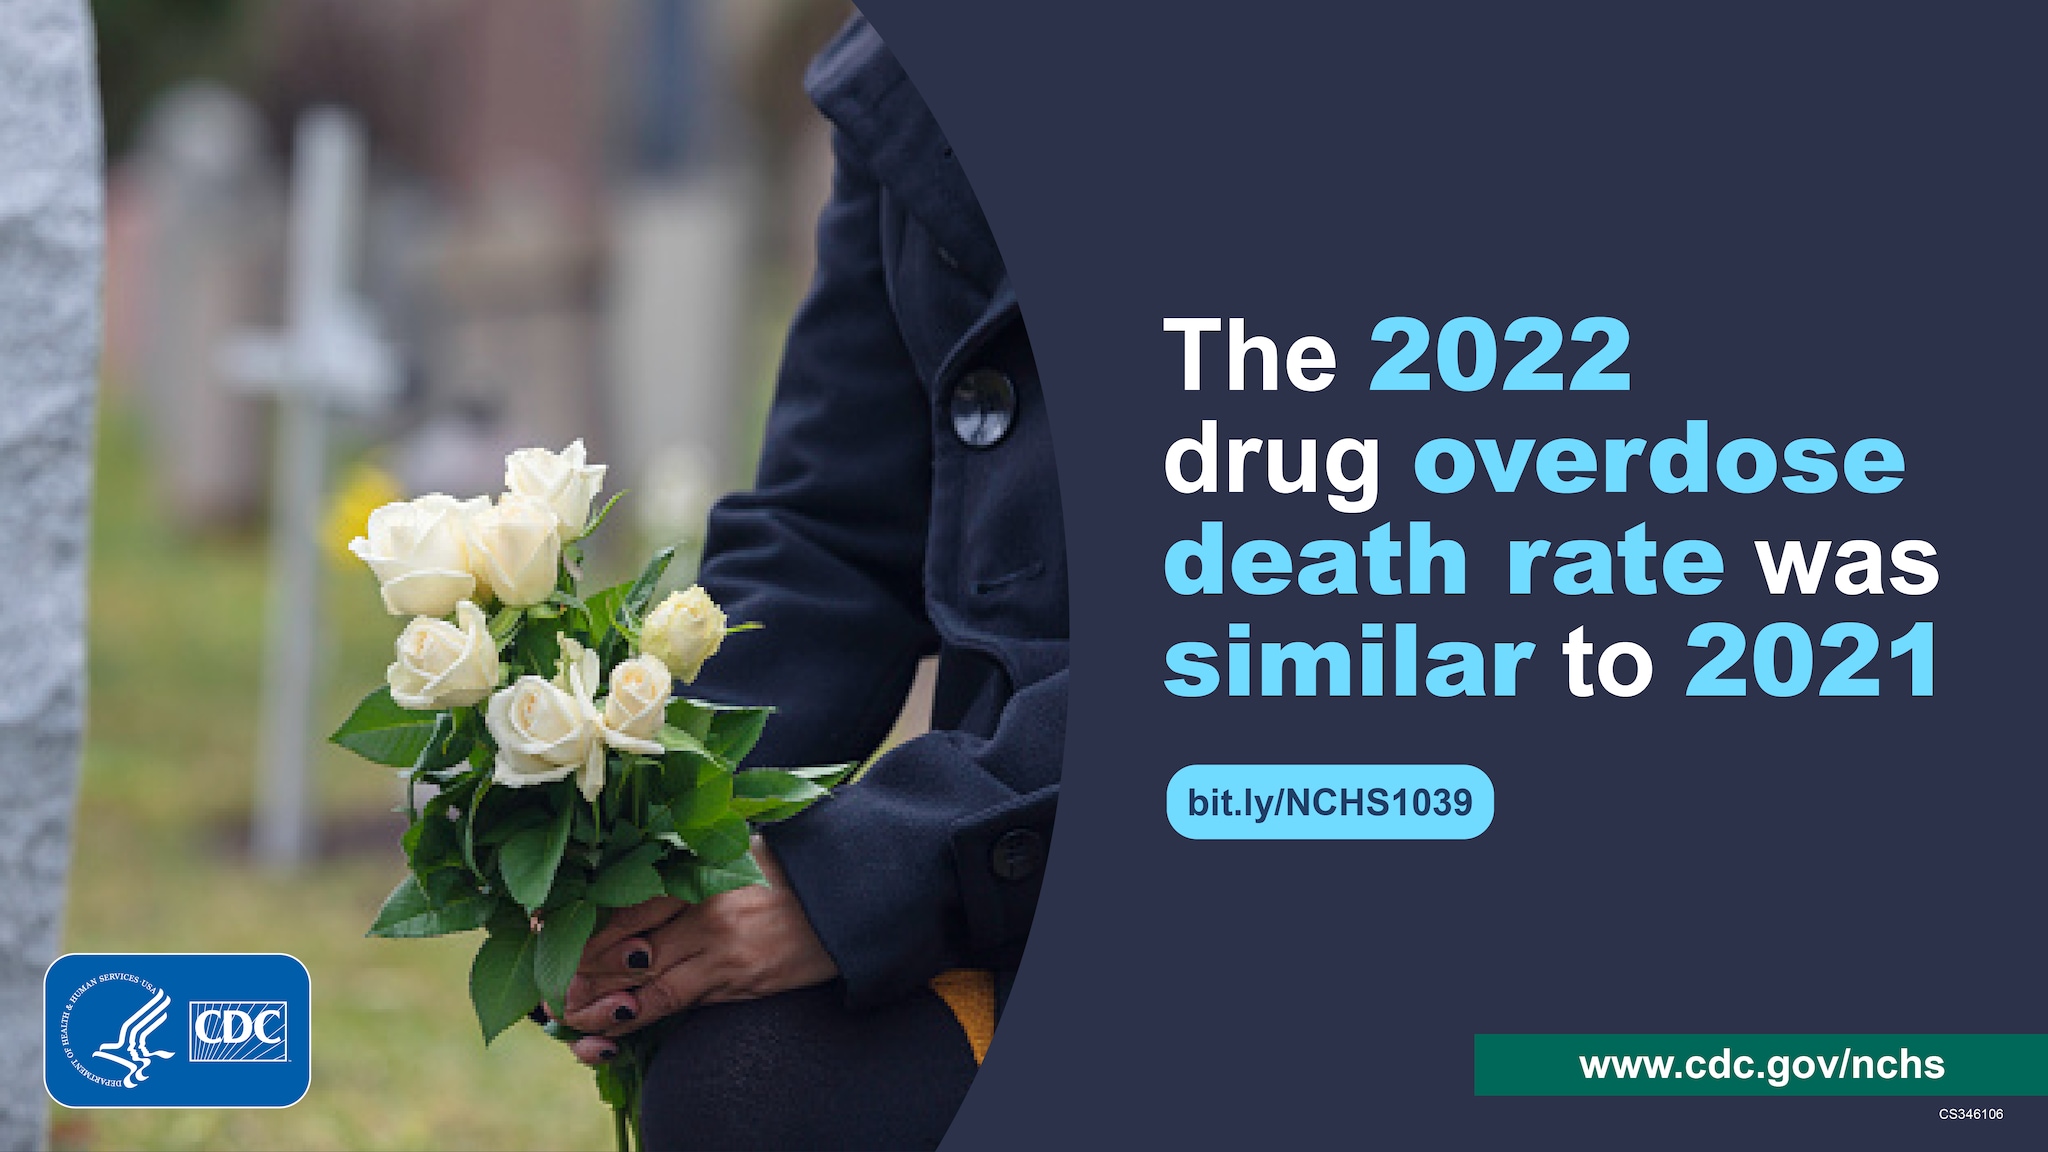 Hands holding flowers at a grave site. Text says the 2022 drug overdose death rate was similar to 2021.